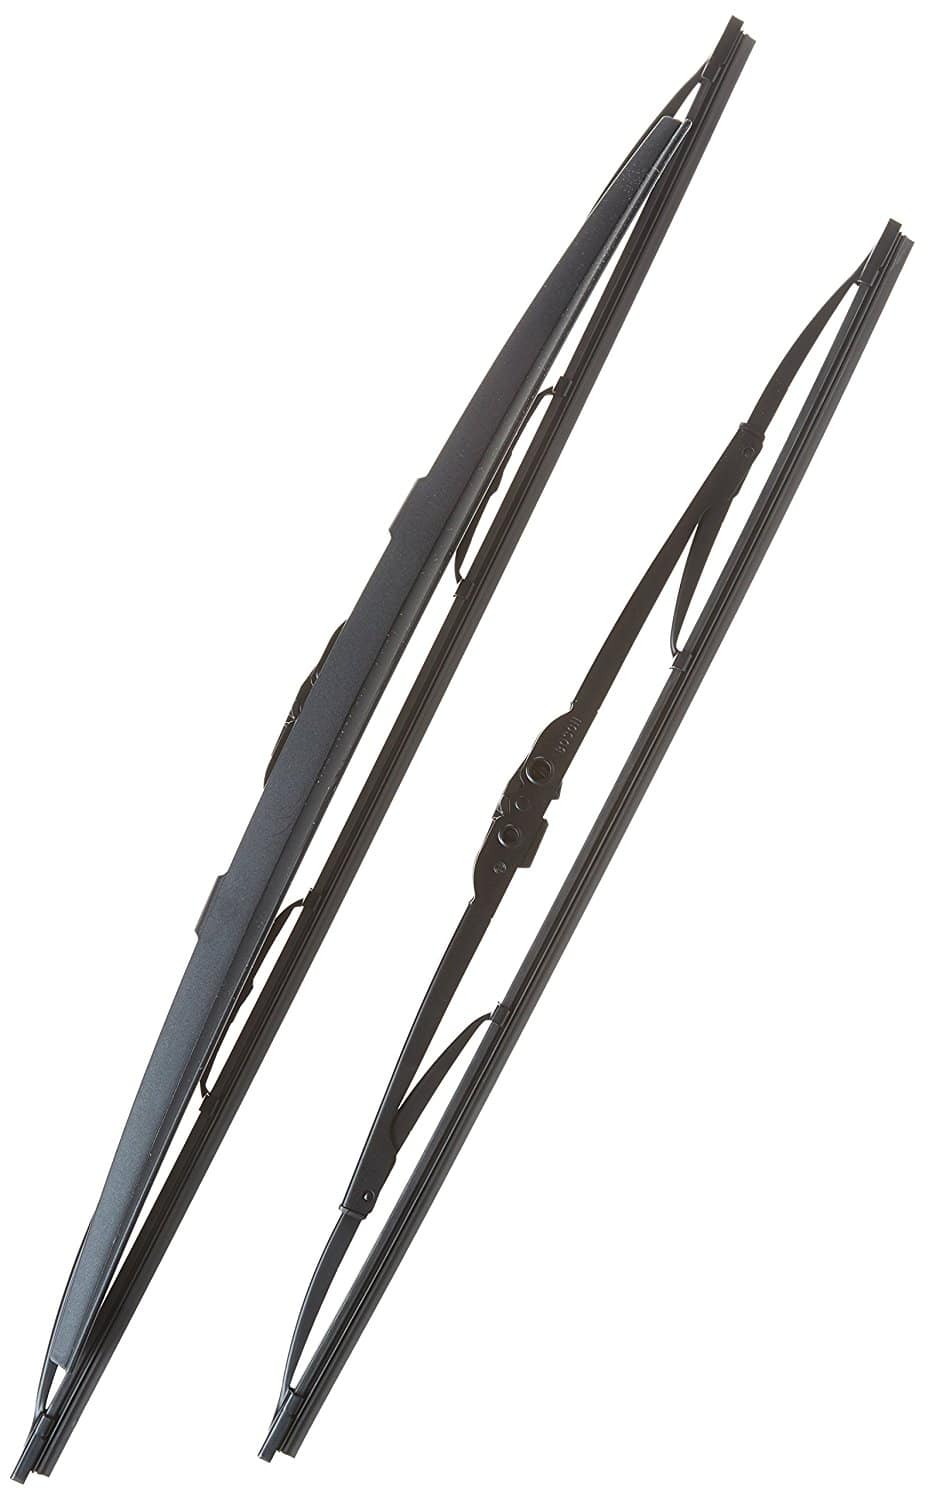 Bosch A310S Set Of Wiper Blades for Ford Mondeo & Vauxhall Vivaro